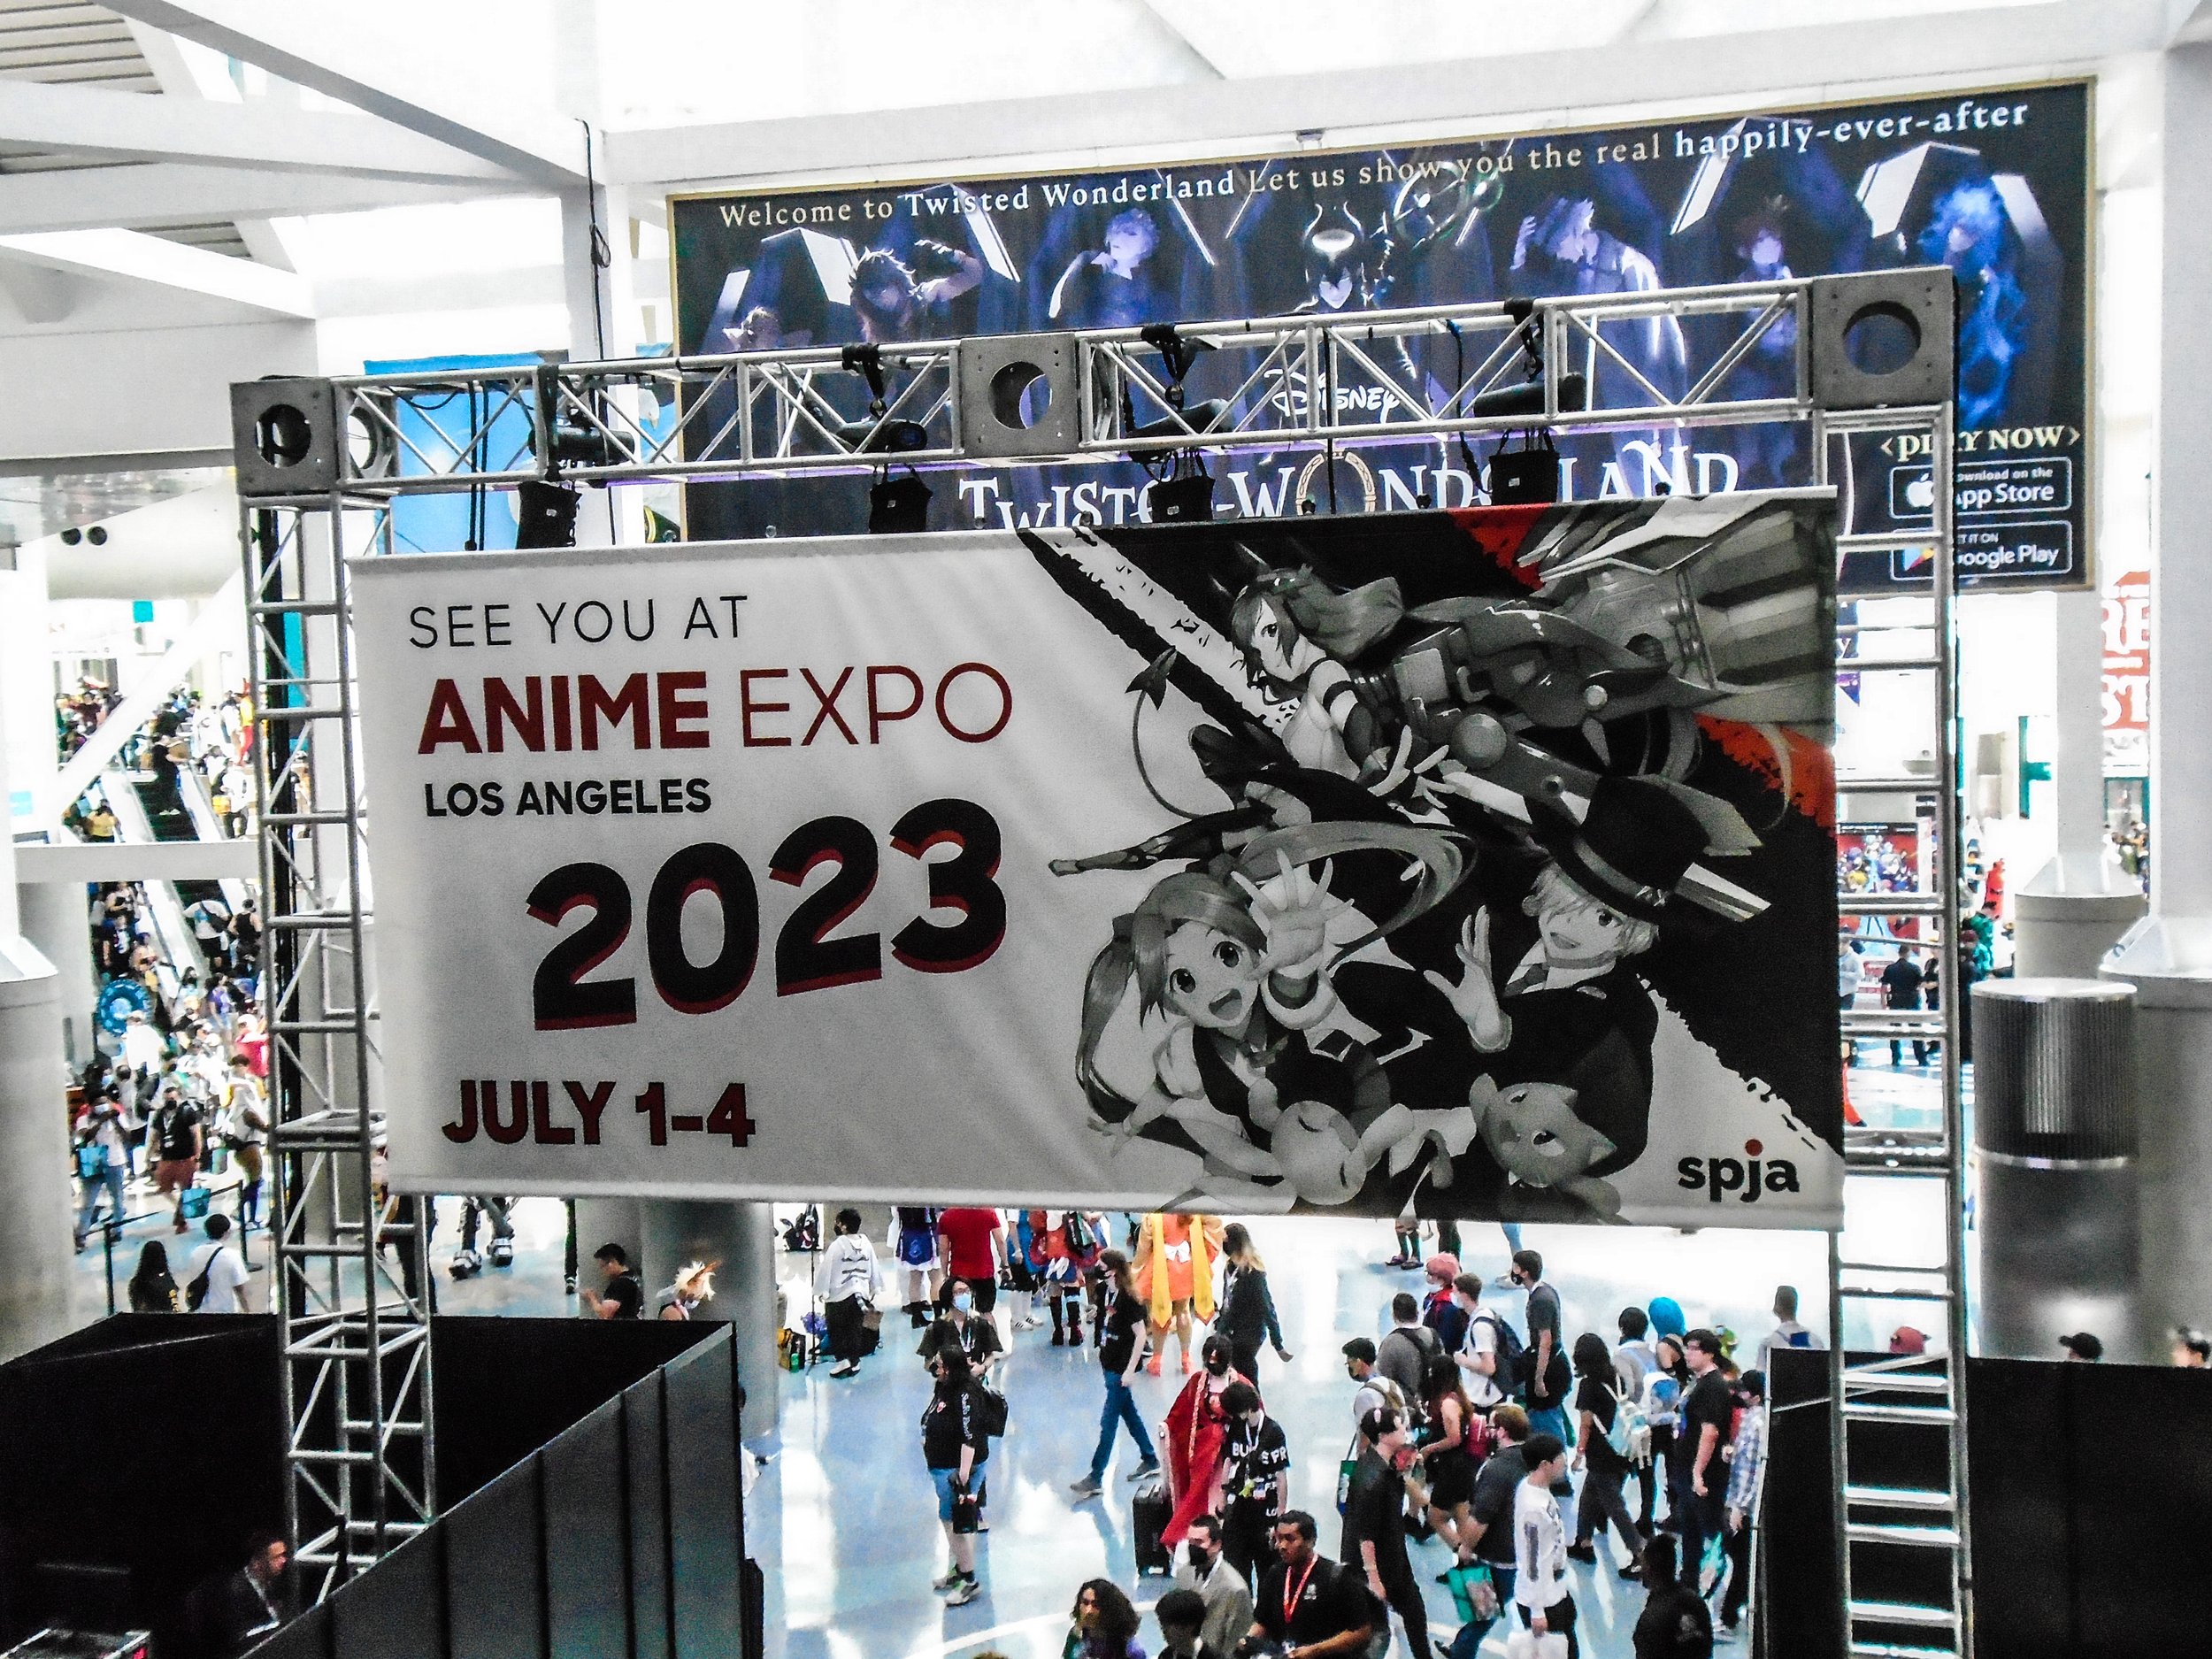 Costume-clad fans hit L.A. Convention Center for Anime Expo